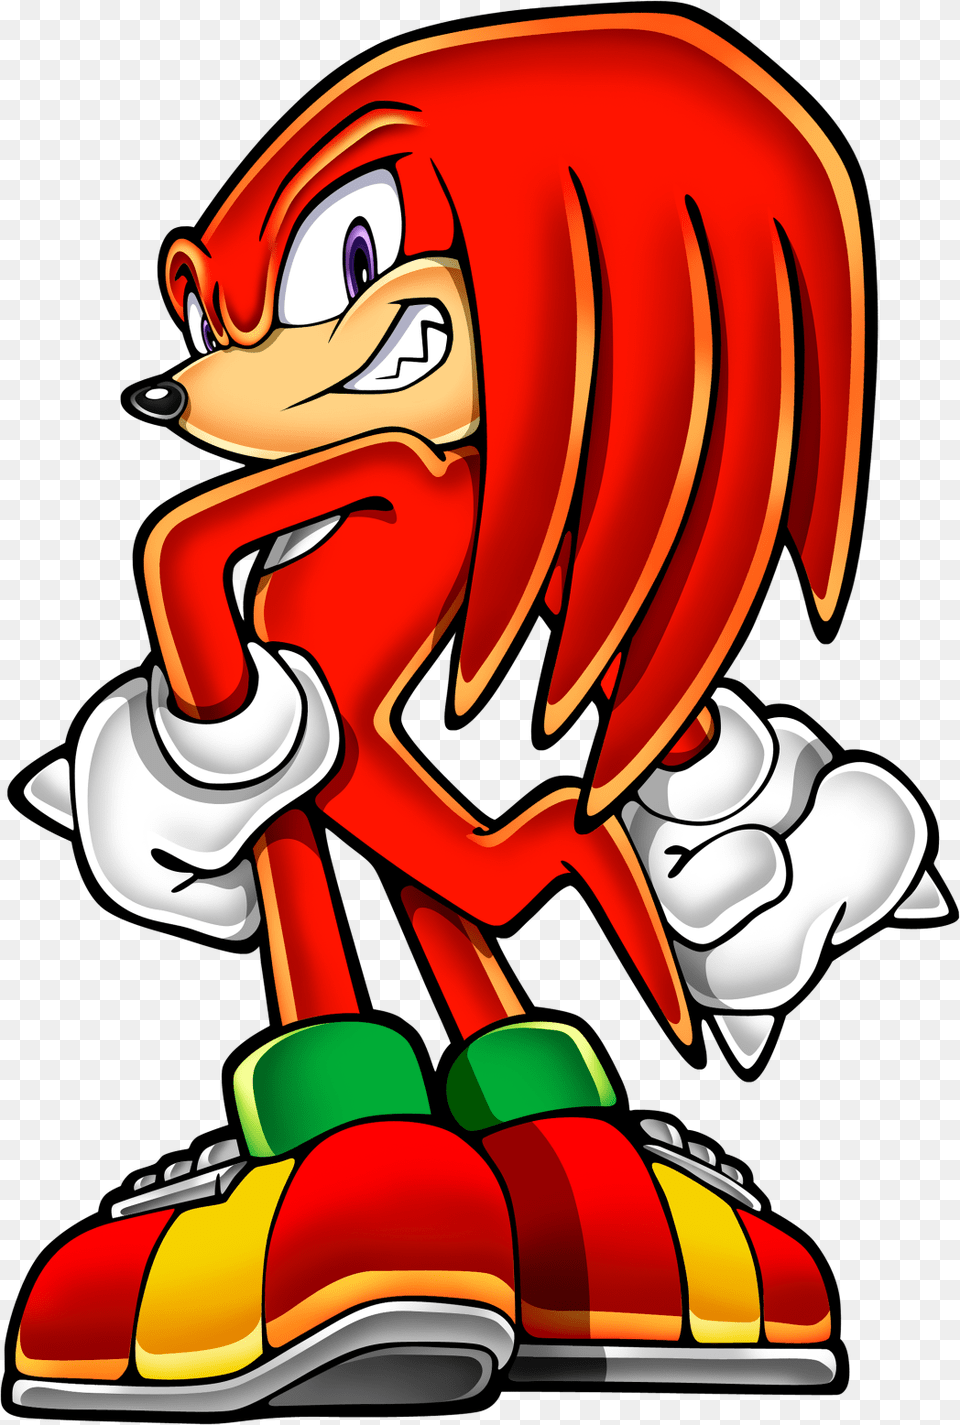 Knuckles 7 Knuckles The Echidna, Book, Comics, Publication, Dynamite Free Png Download